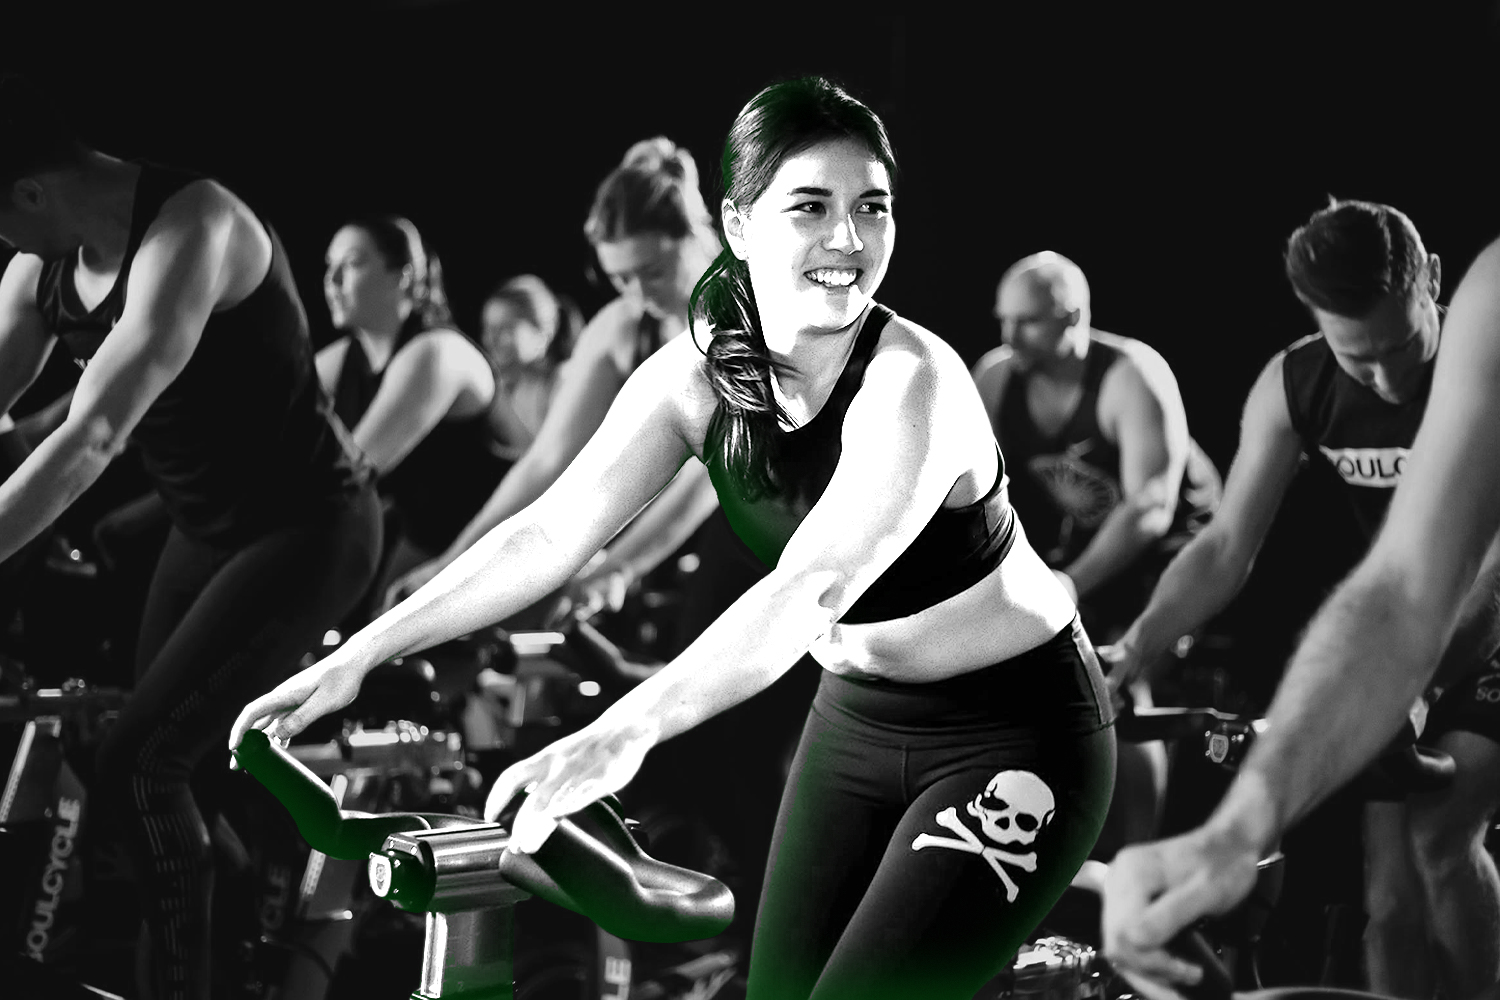 SoulCycle Sees People Return to Gyms “In Droves”